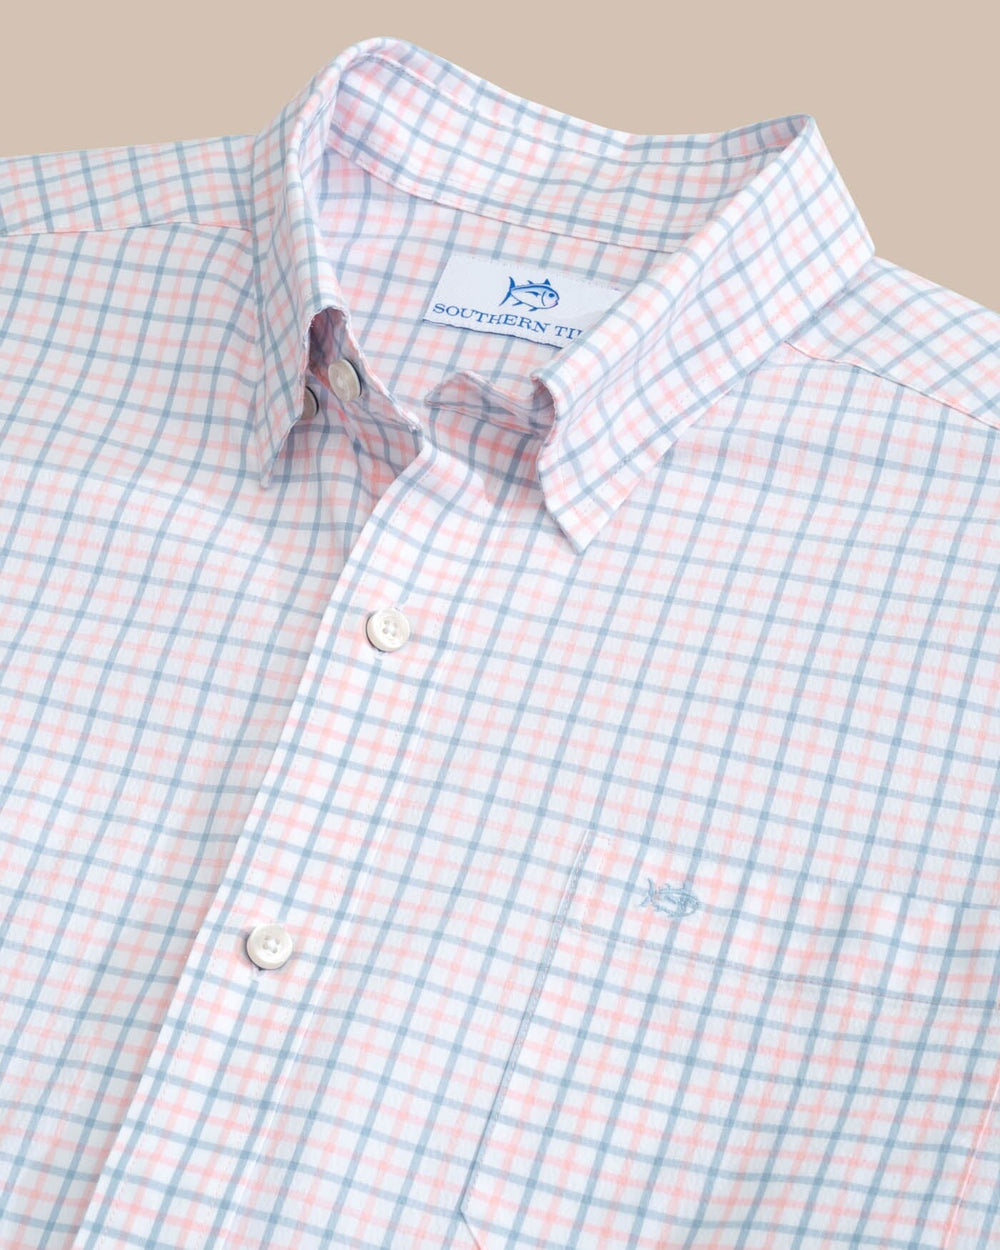 The detail view of the Southern Tide Charleston Larkin Check Long Sleeve Sport Shirt by Southern Tide - Pale Rosette Pink